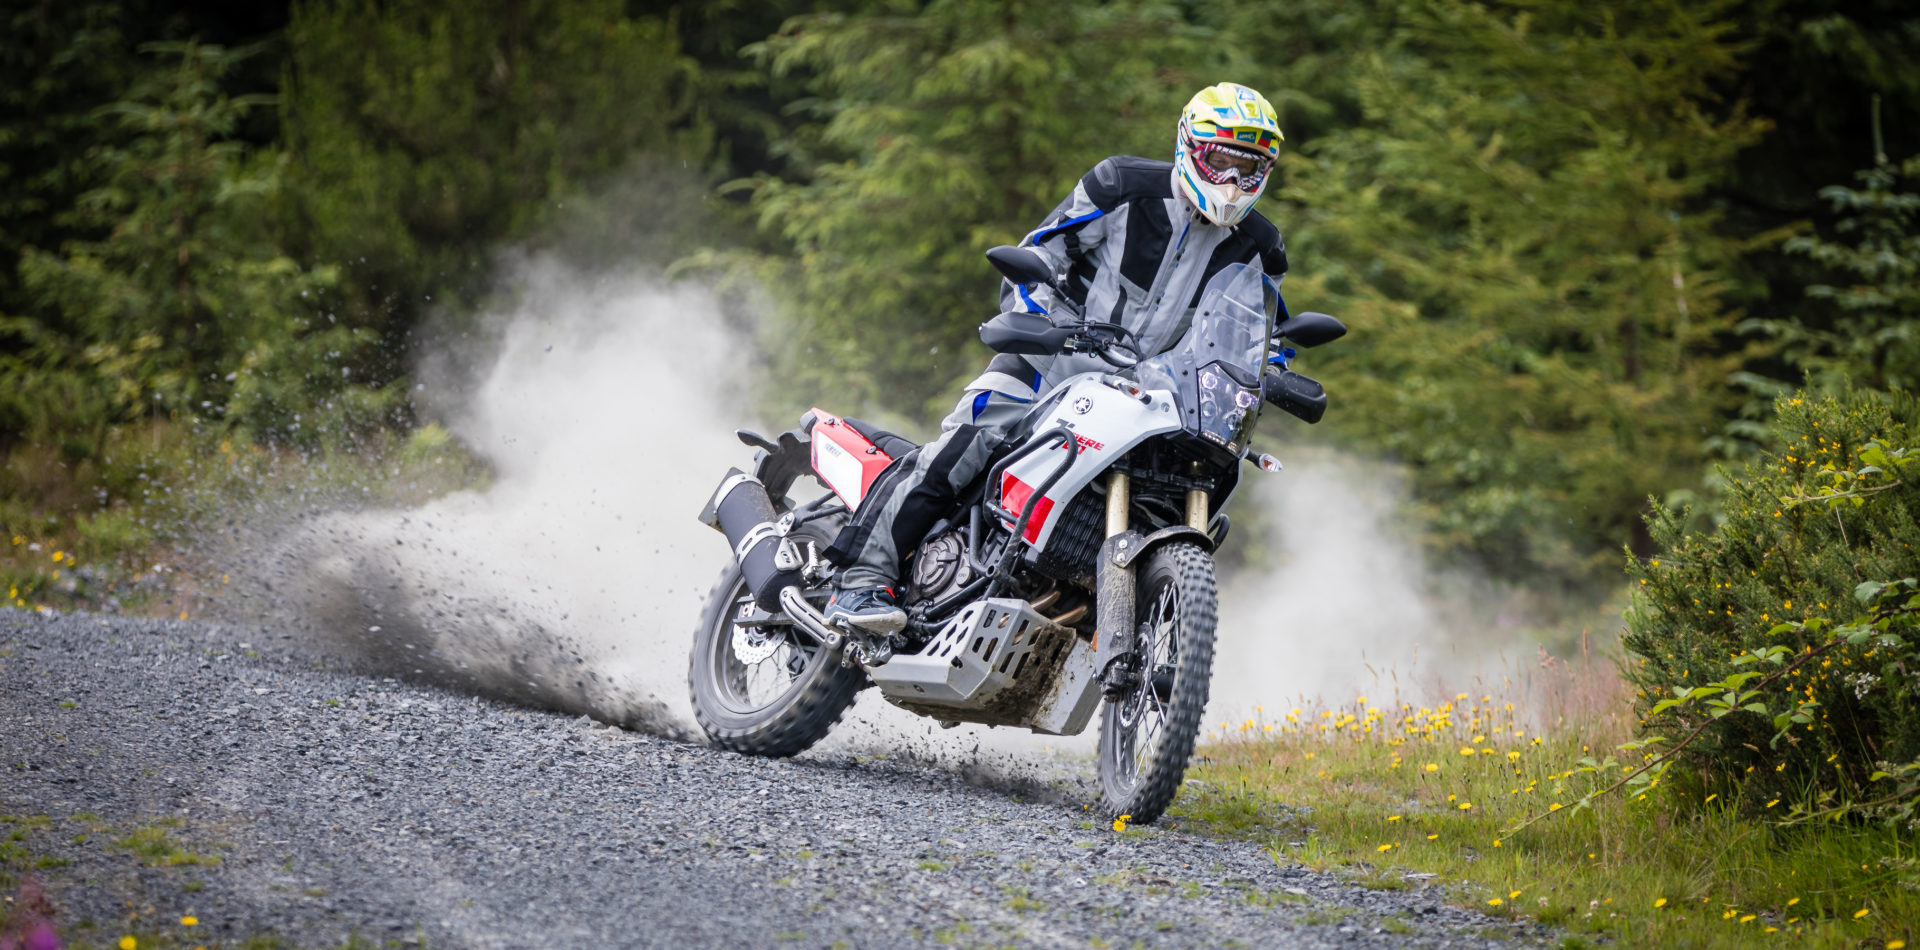 One of the Yamaha Tenere Experience instructors showing their adventure riding skills off road, power sliding the Tenere 700 on gravel.